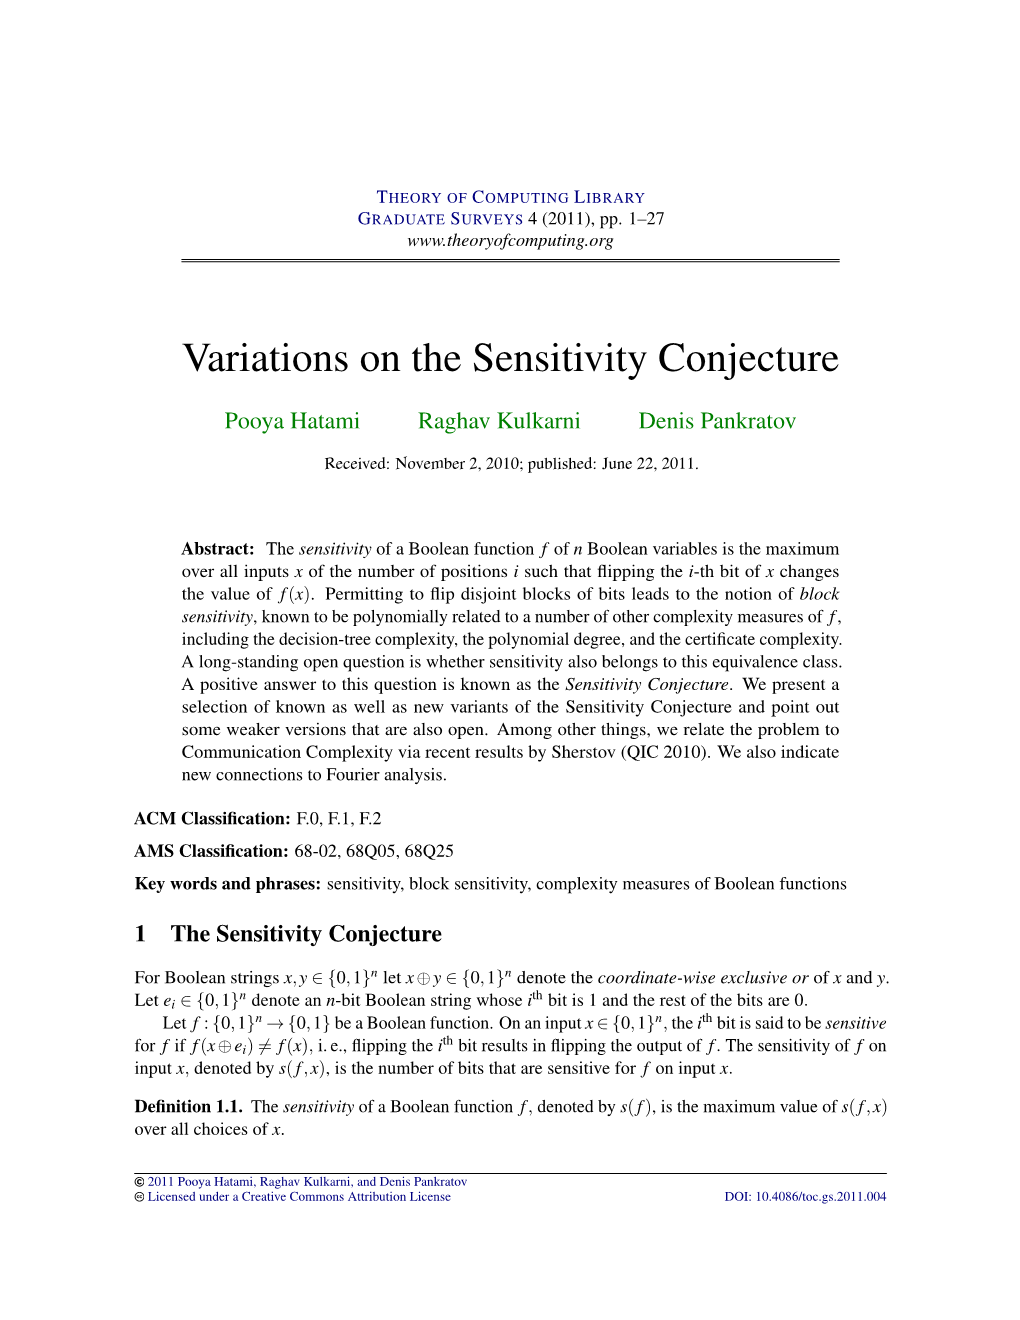 Variations on the Sensitivity Conjecture